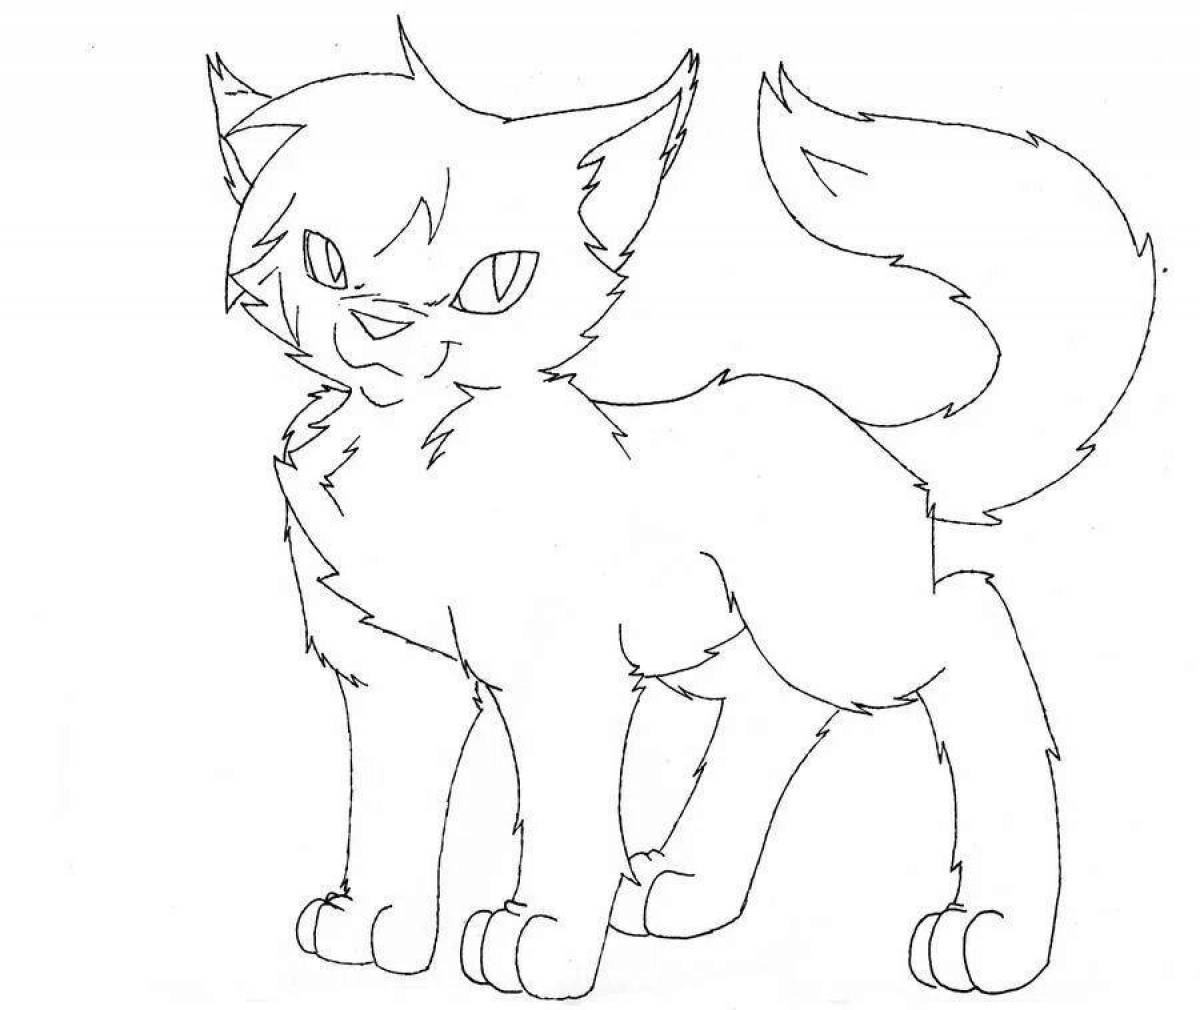 Exquisite warrior cats scourge coloring page